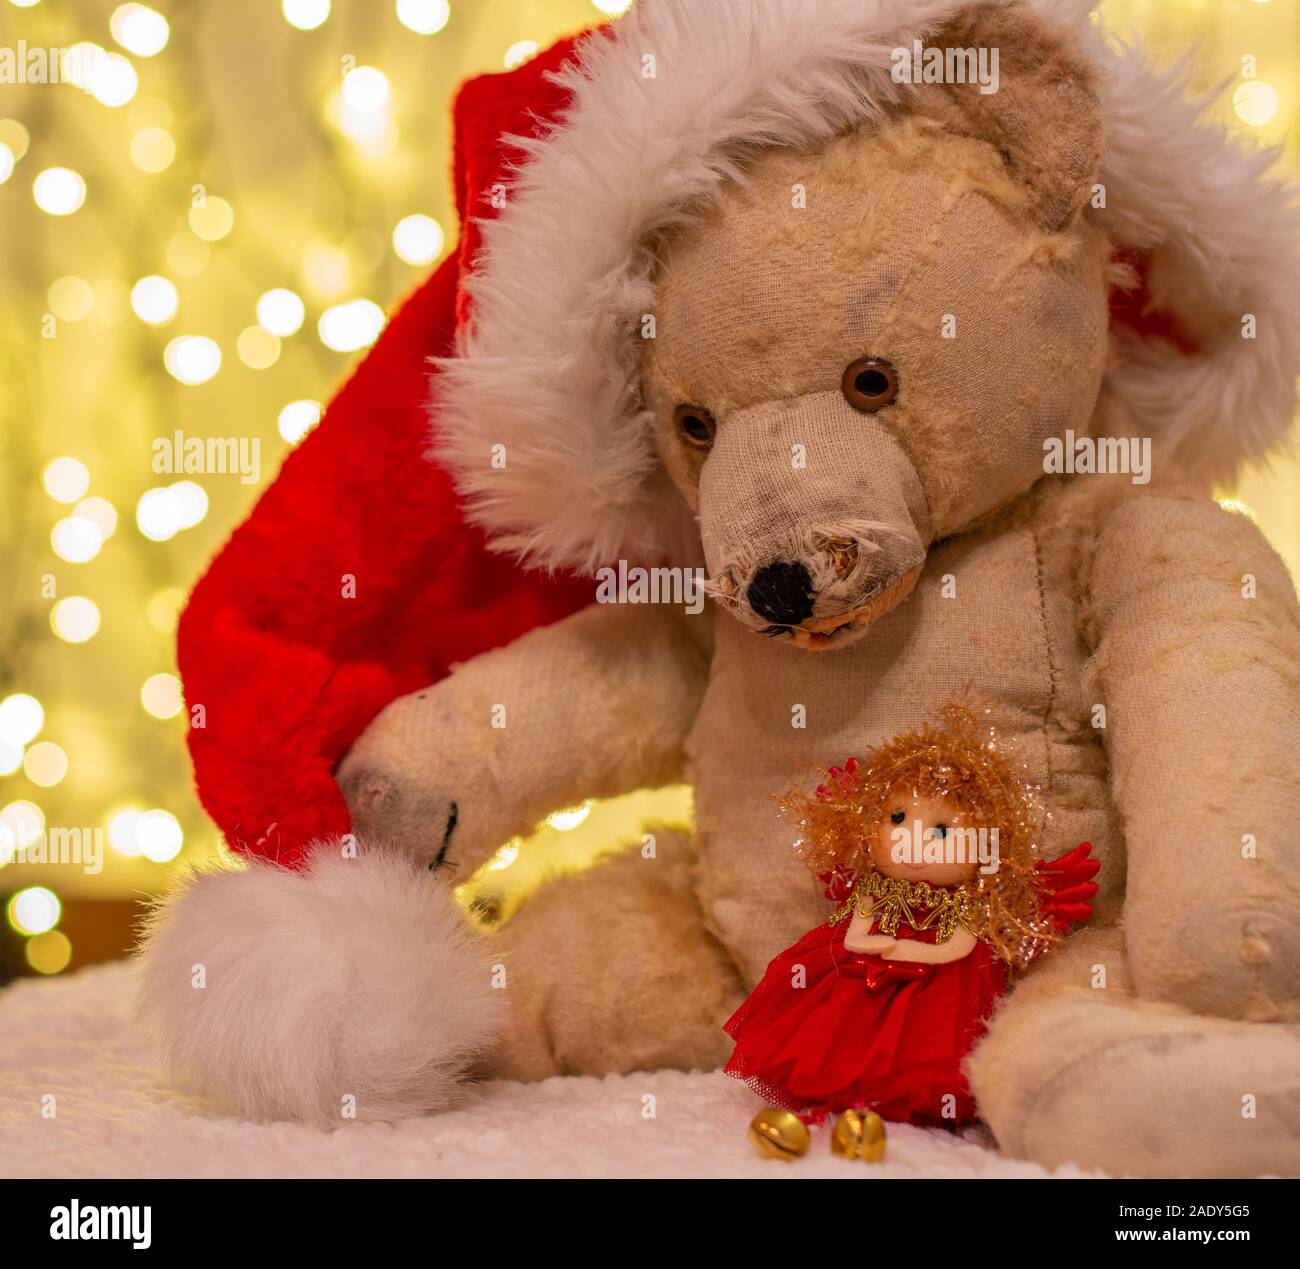 Very old soft toy. Old teddy bear with red  Christmas hat. In the backdrop are christmas lights. With soft doll in red. Stock Photo